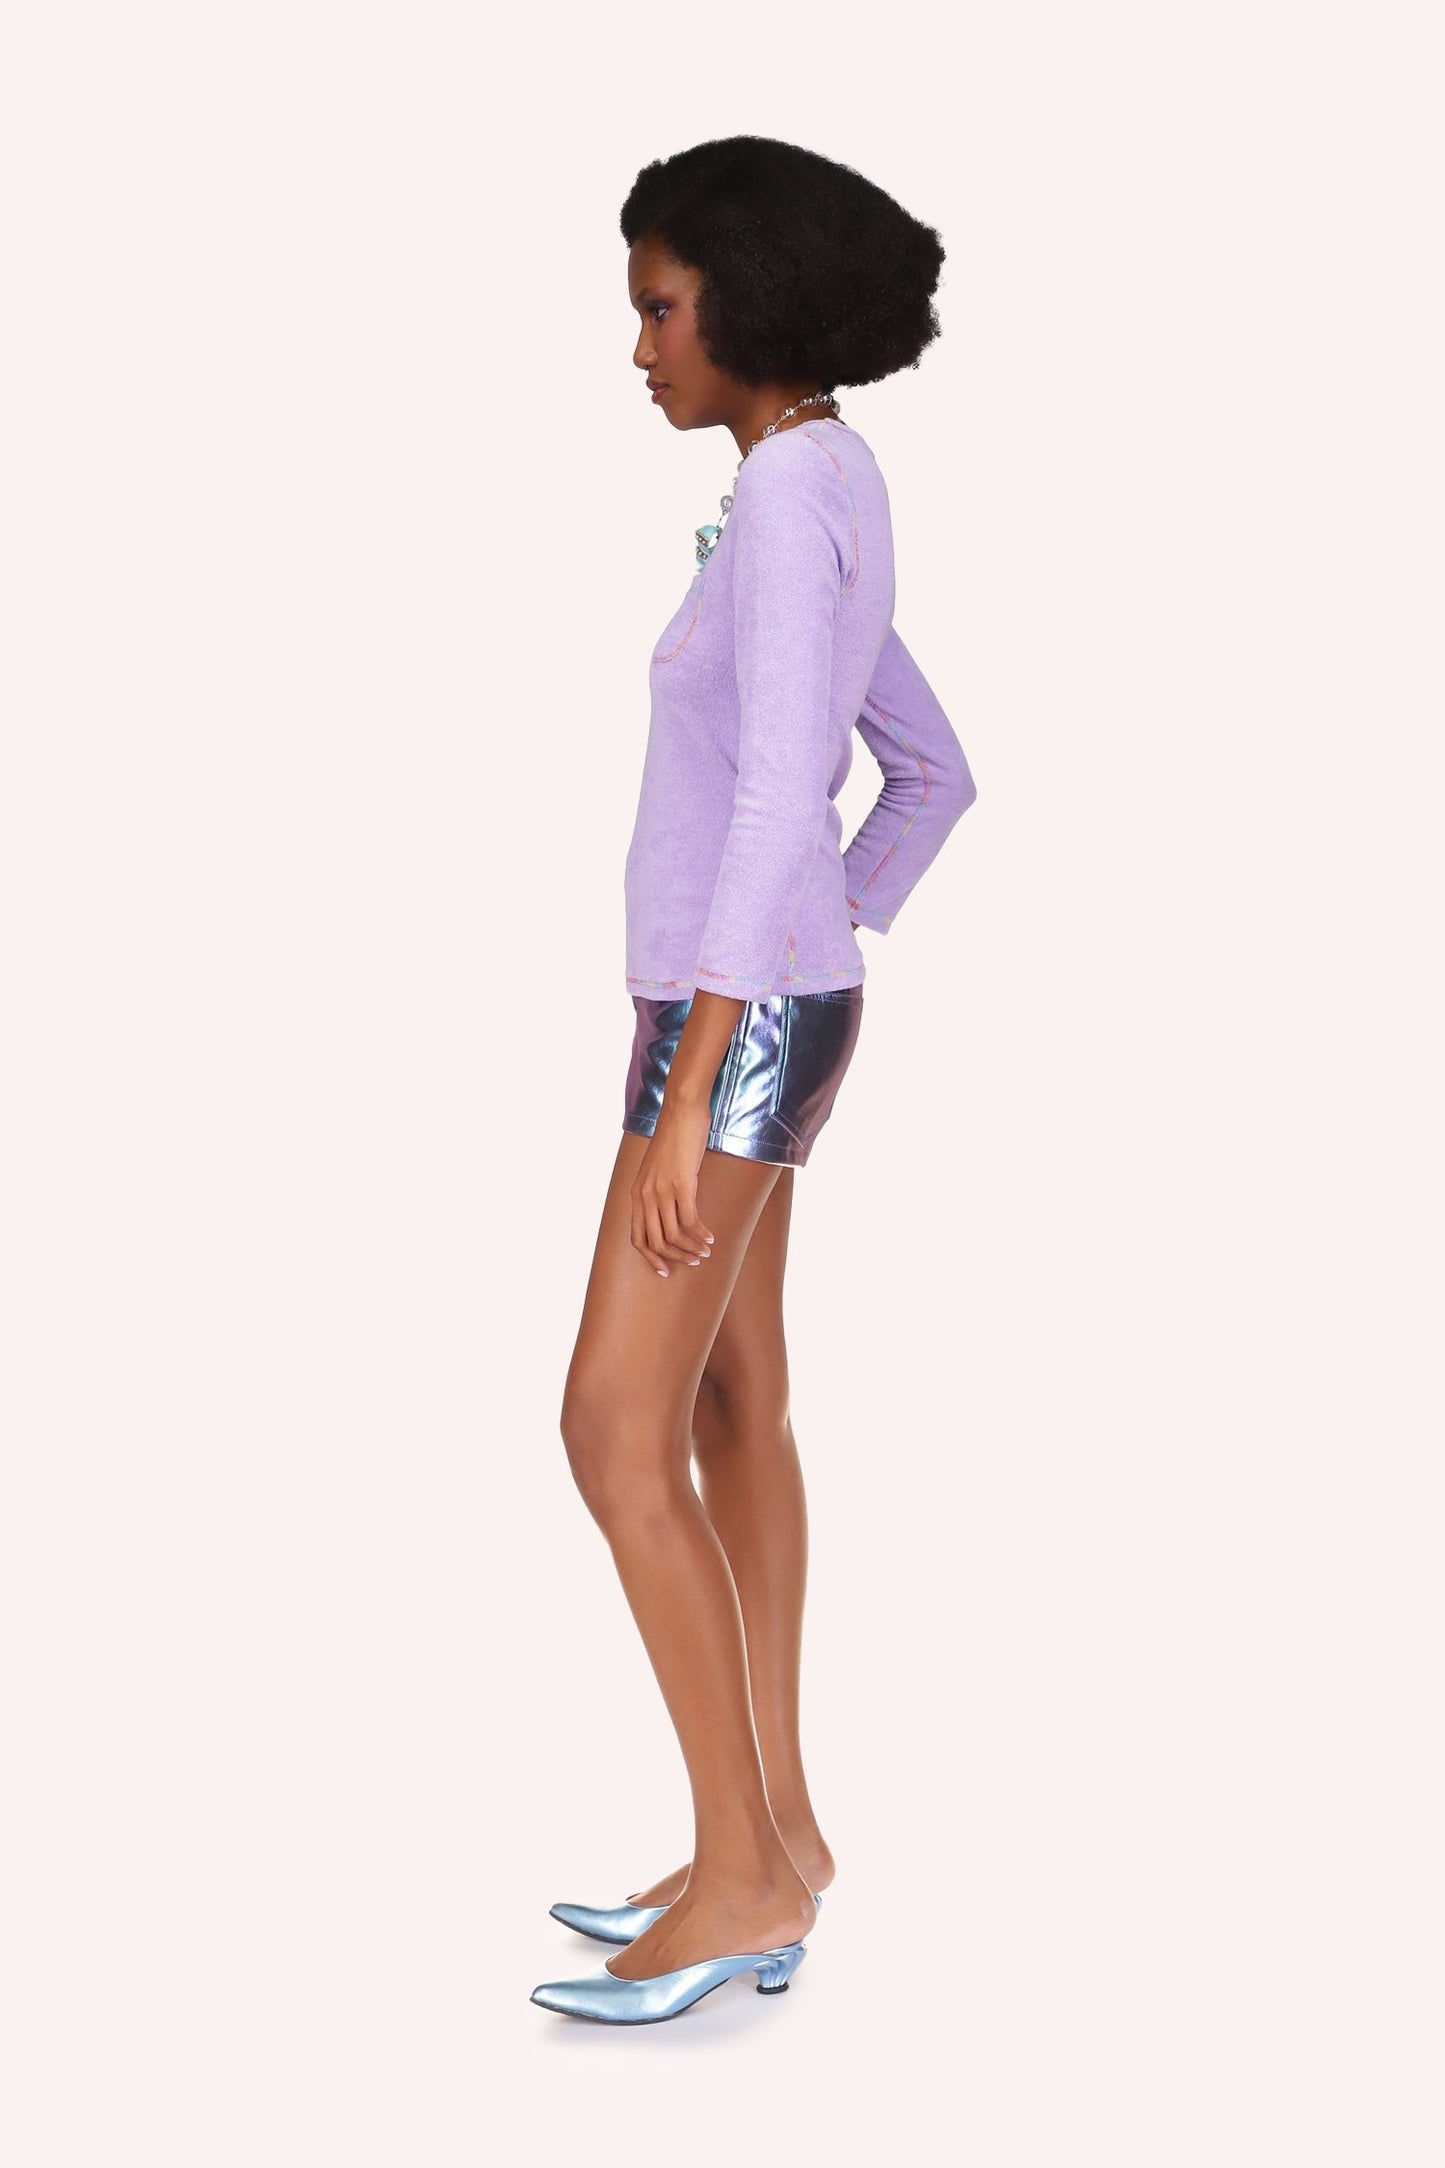 Metallic Faux Leather Shorts, in a hue of blue, fitted short, large stiches hem on sides